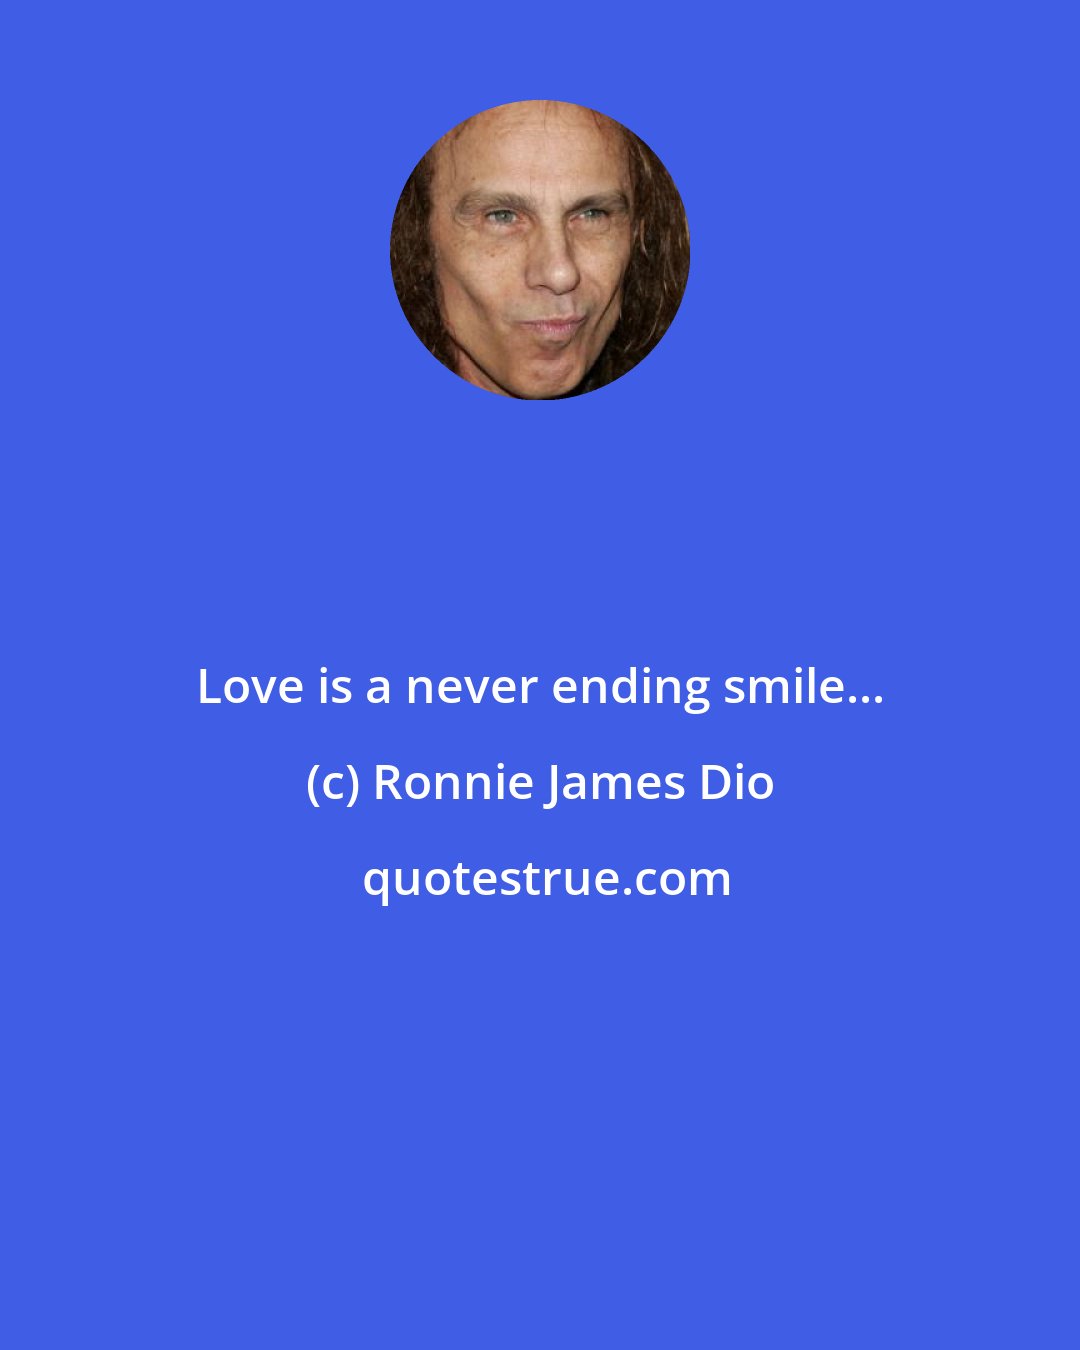 Ronnie James Dio: Love is a never ending smile...